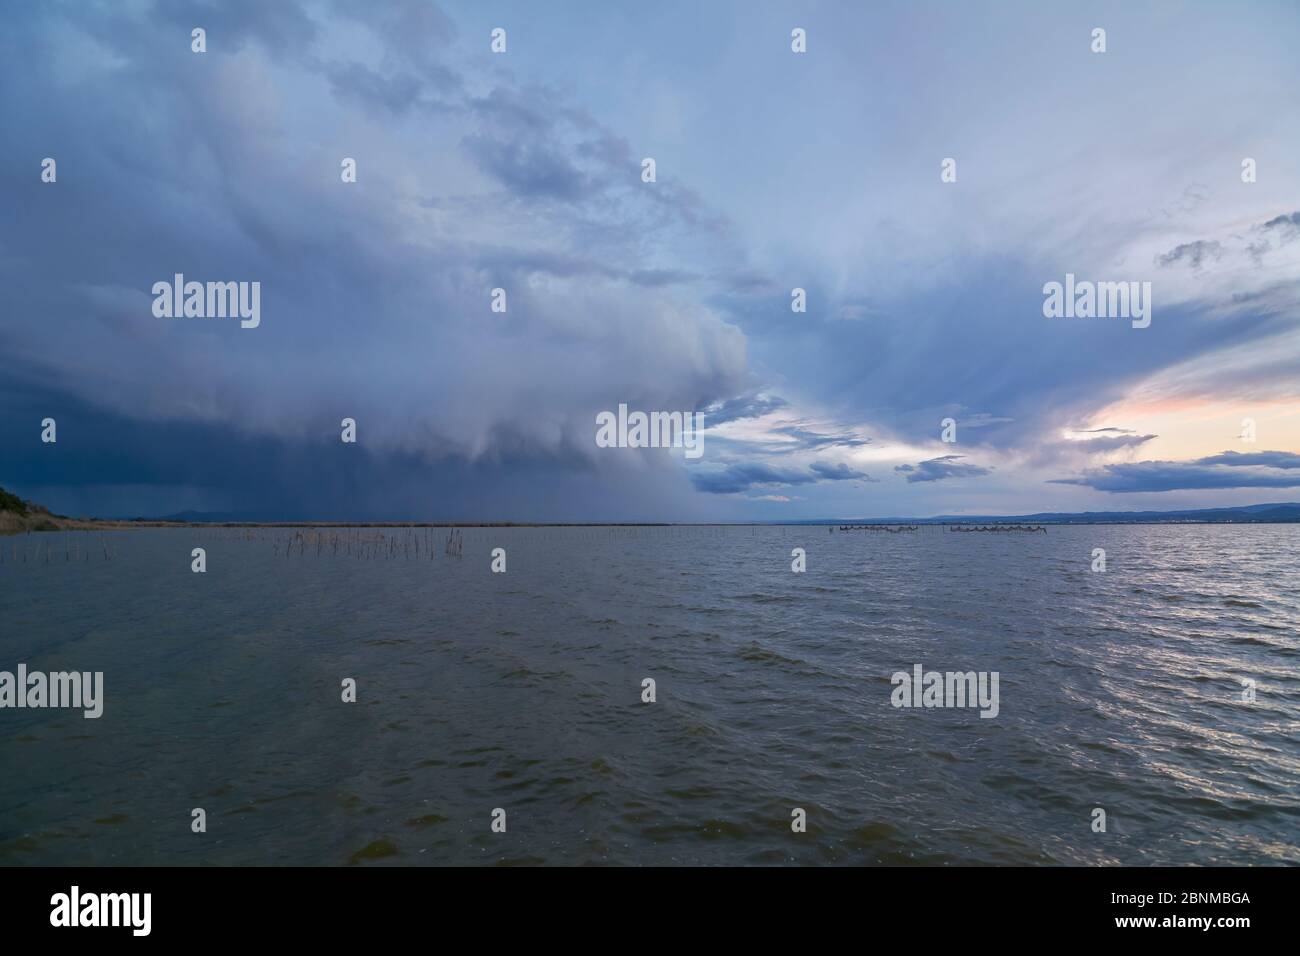 Landscape of a lake with storm clouds, moving waters reeds in the water, bluish tones Stock Photo